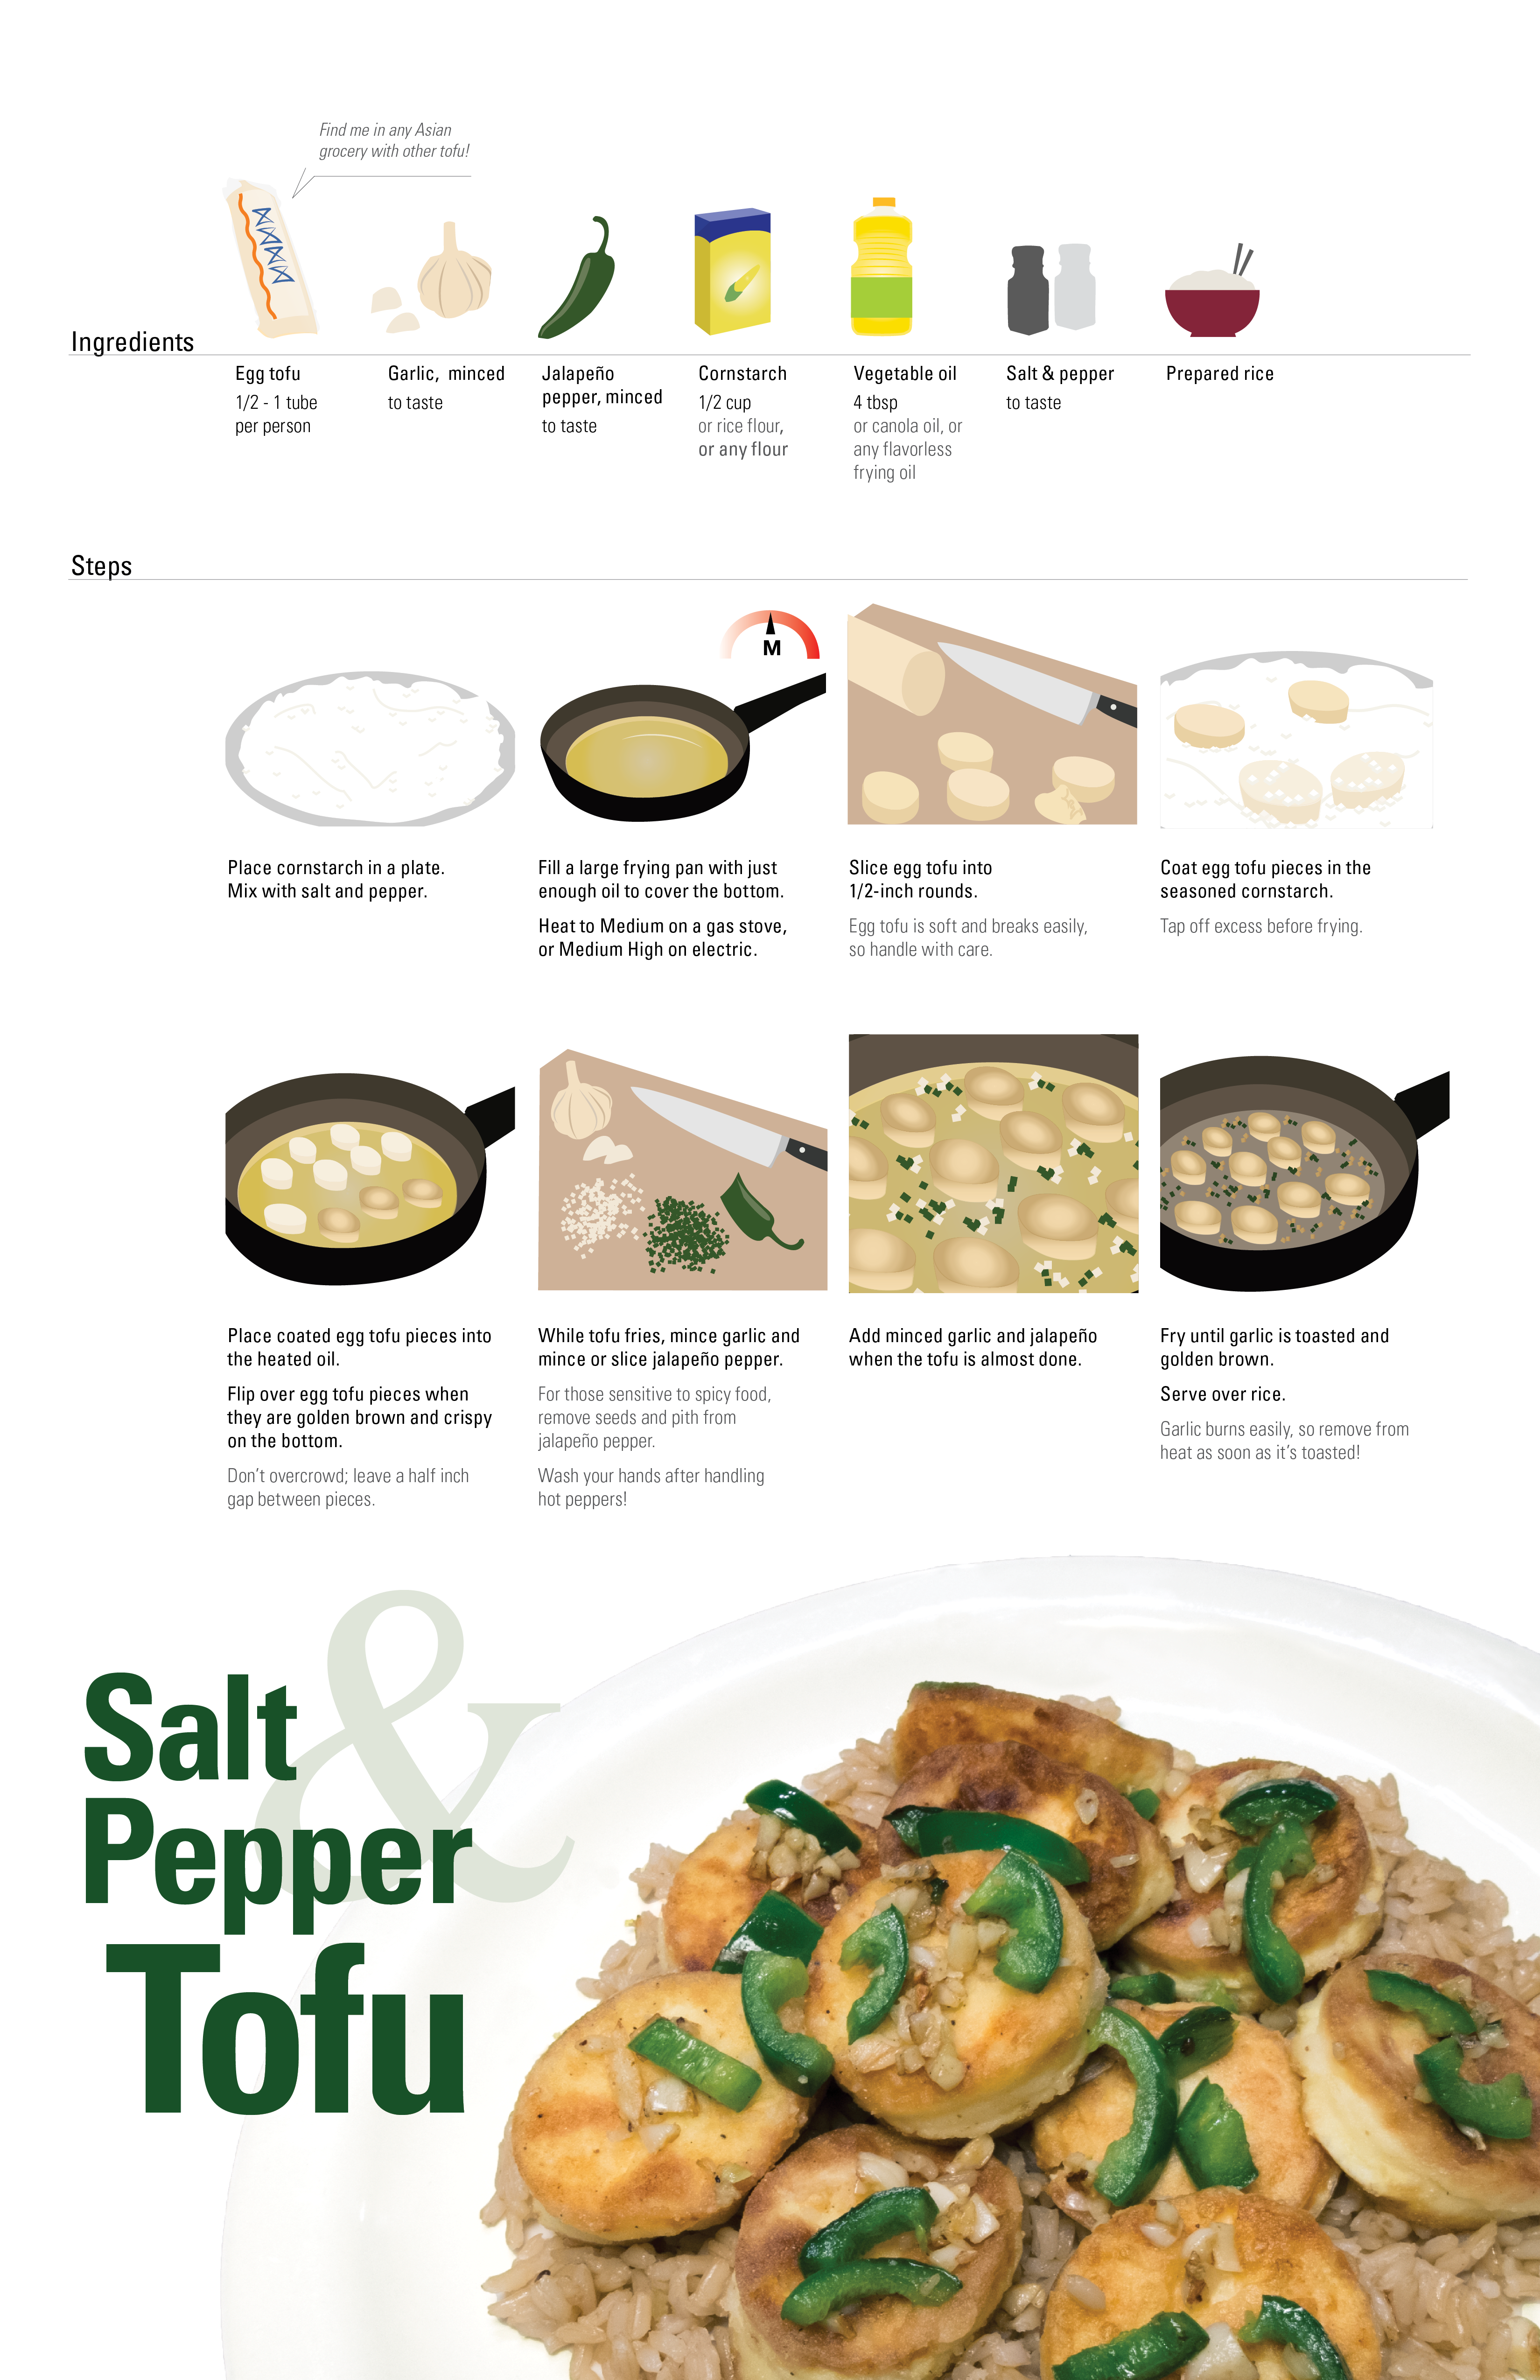 A visual recipe for Salt & Pepper Tofu as an example of communication design.